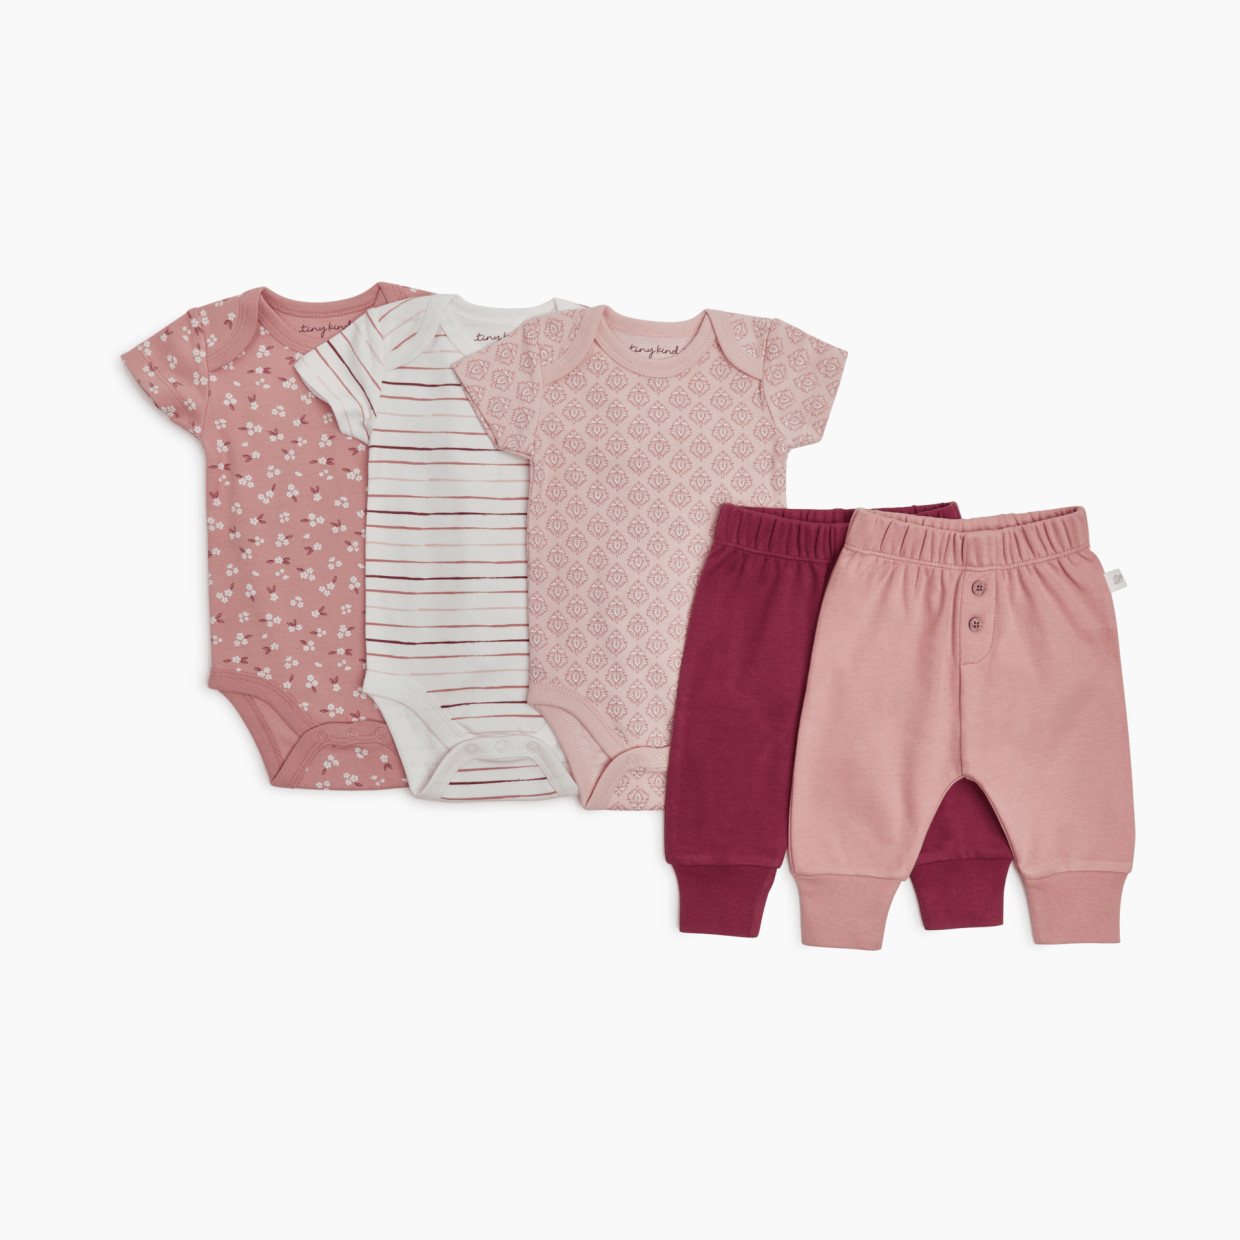 Tiny Kind 3 Pack Assorted Bodysuits - Assorted Pinks, 9-12 M.